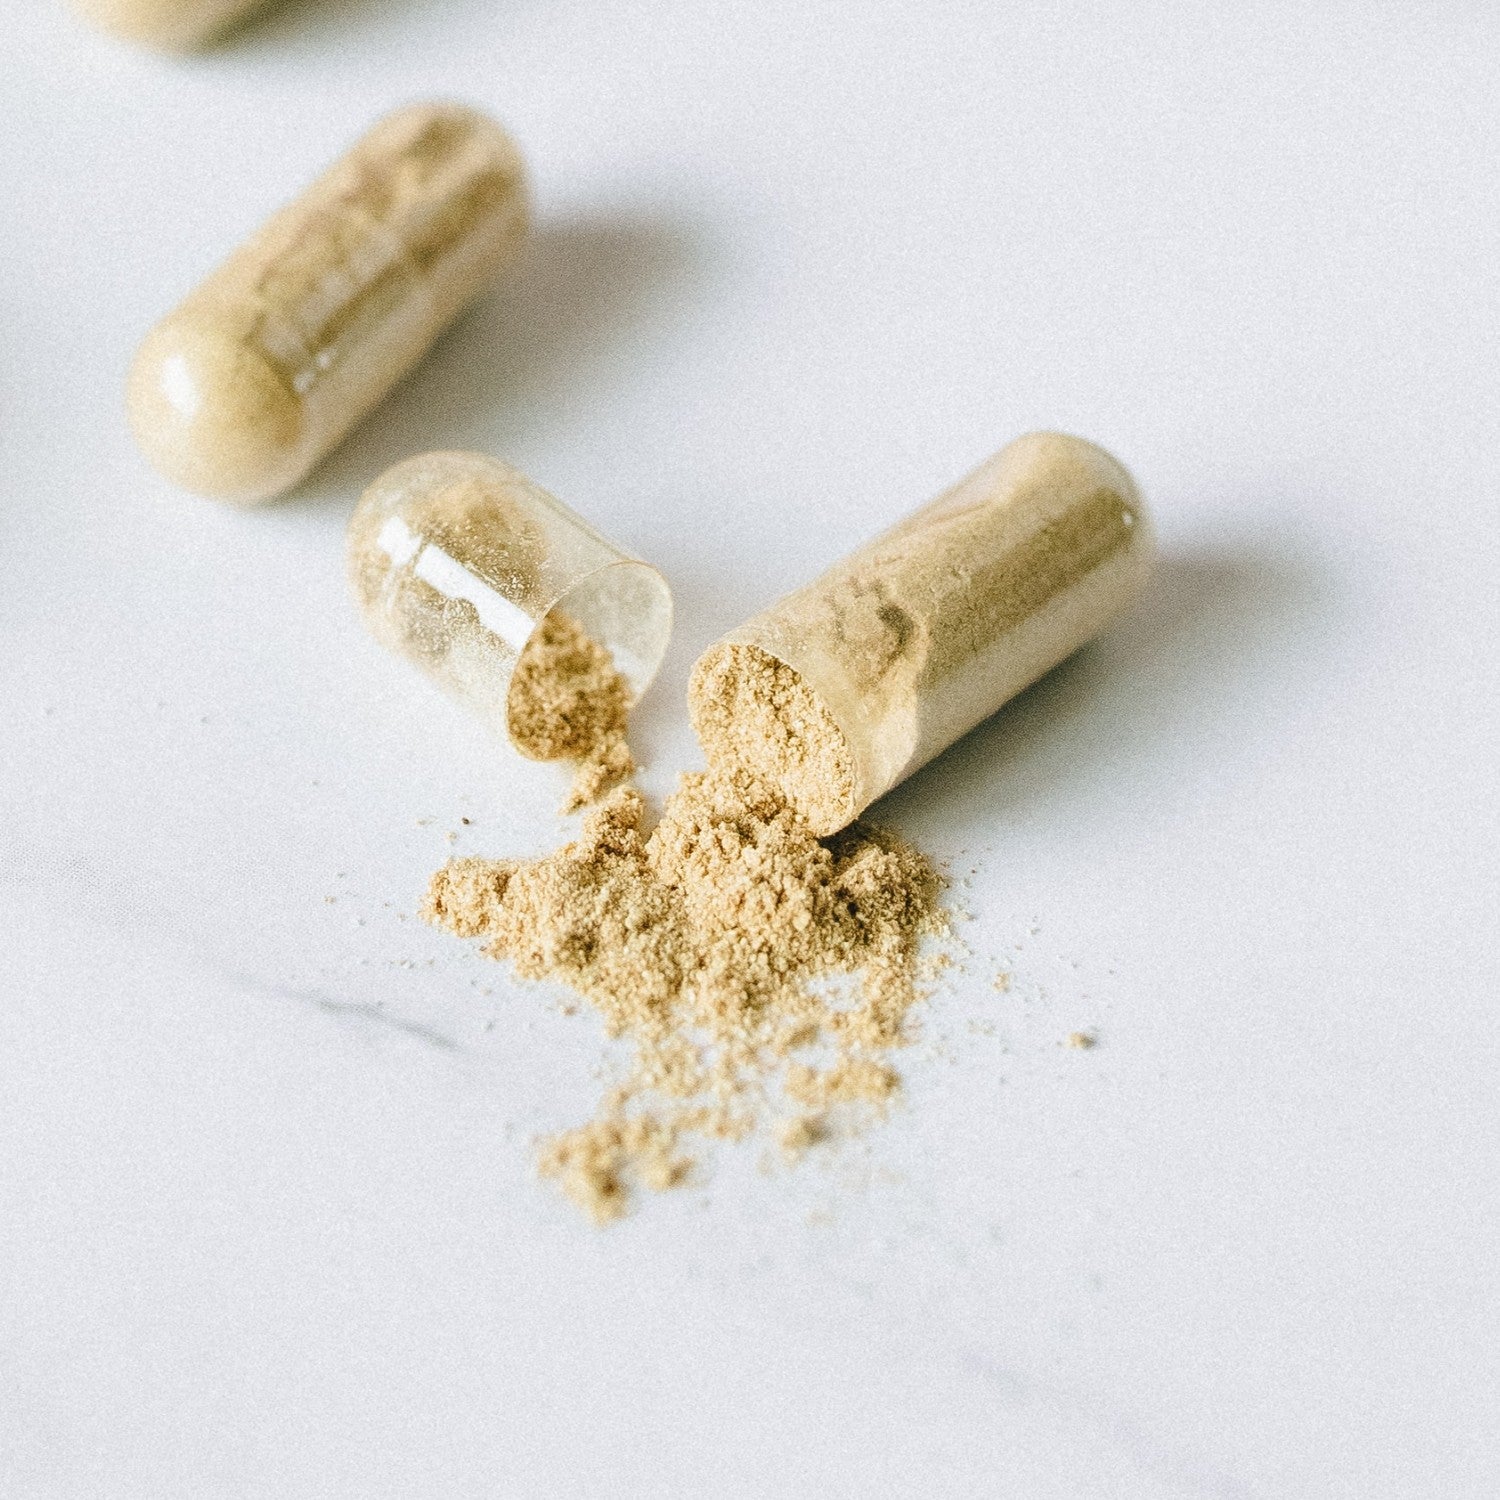 how to choose a quality supplement